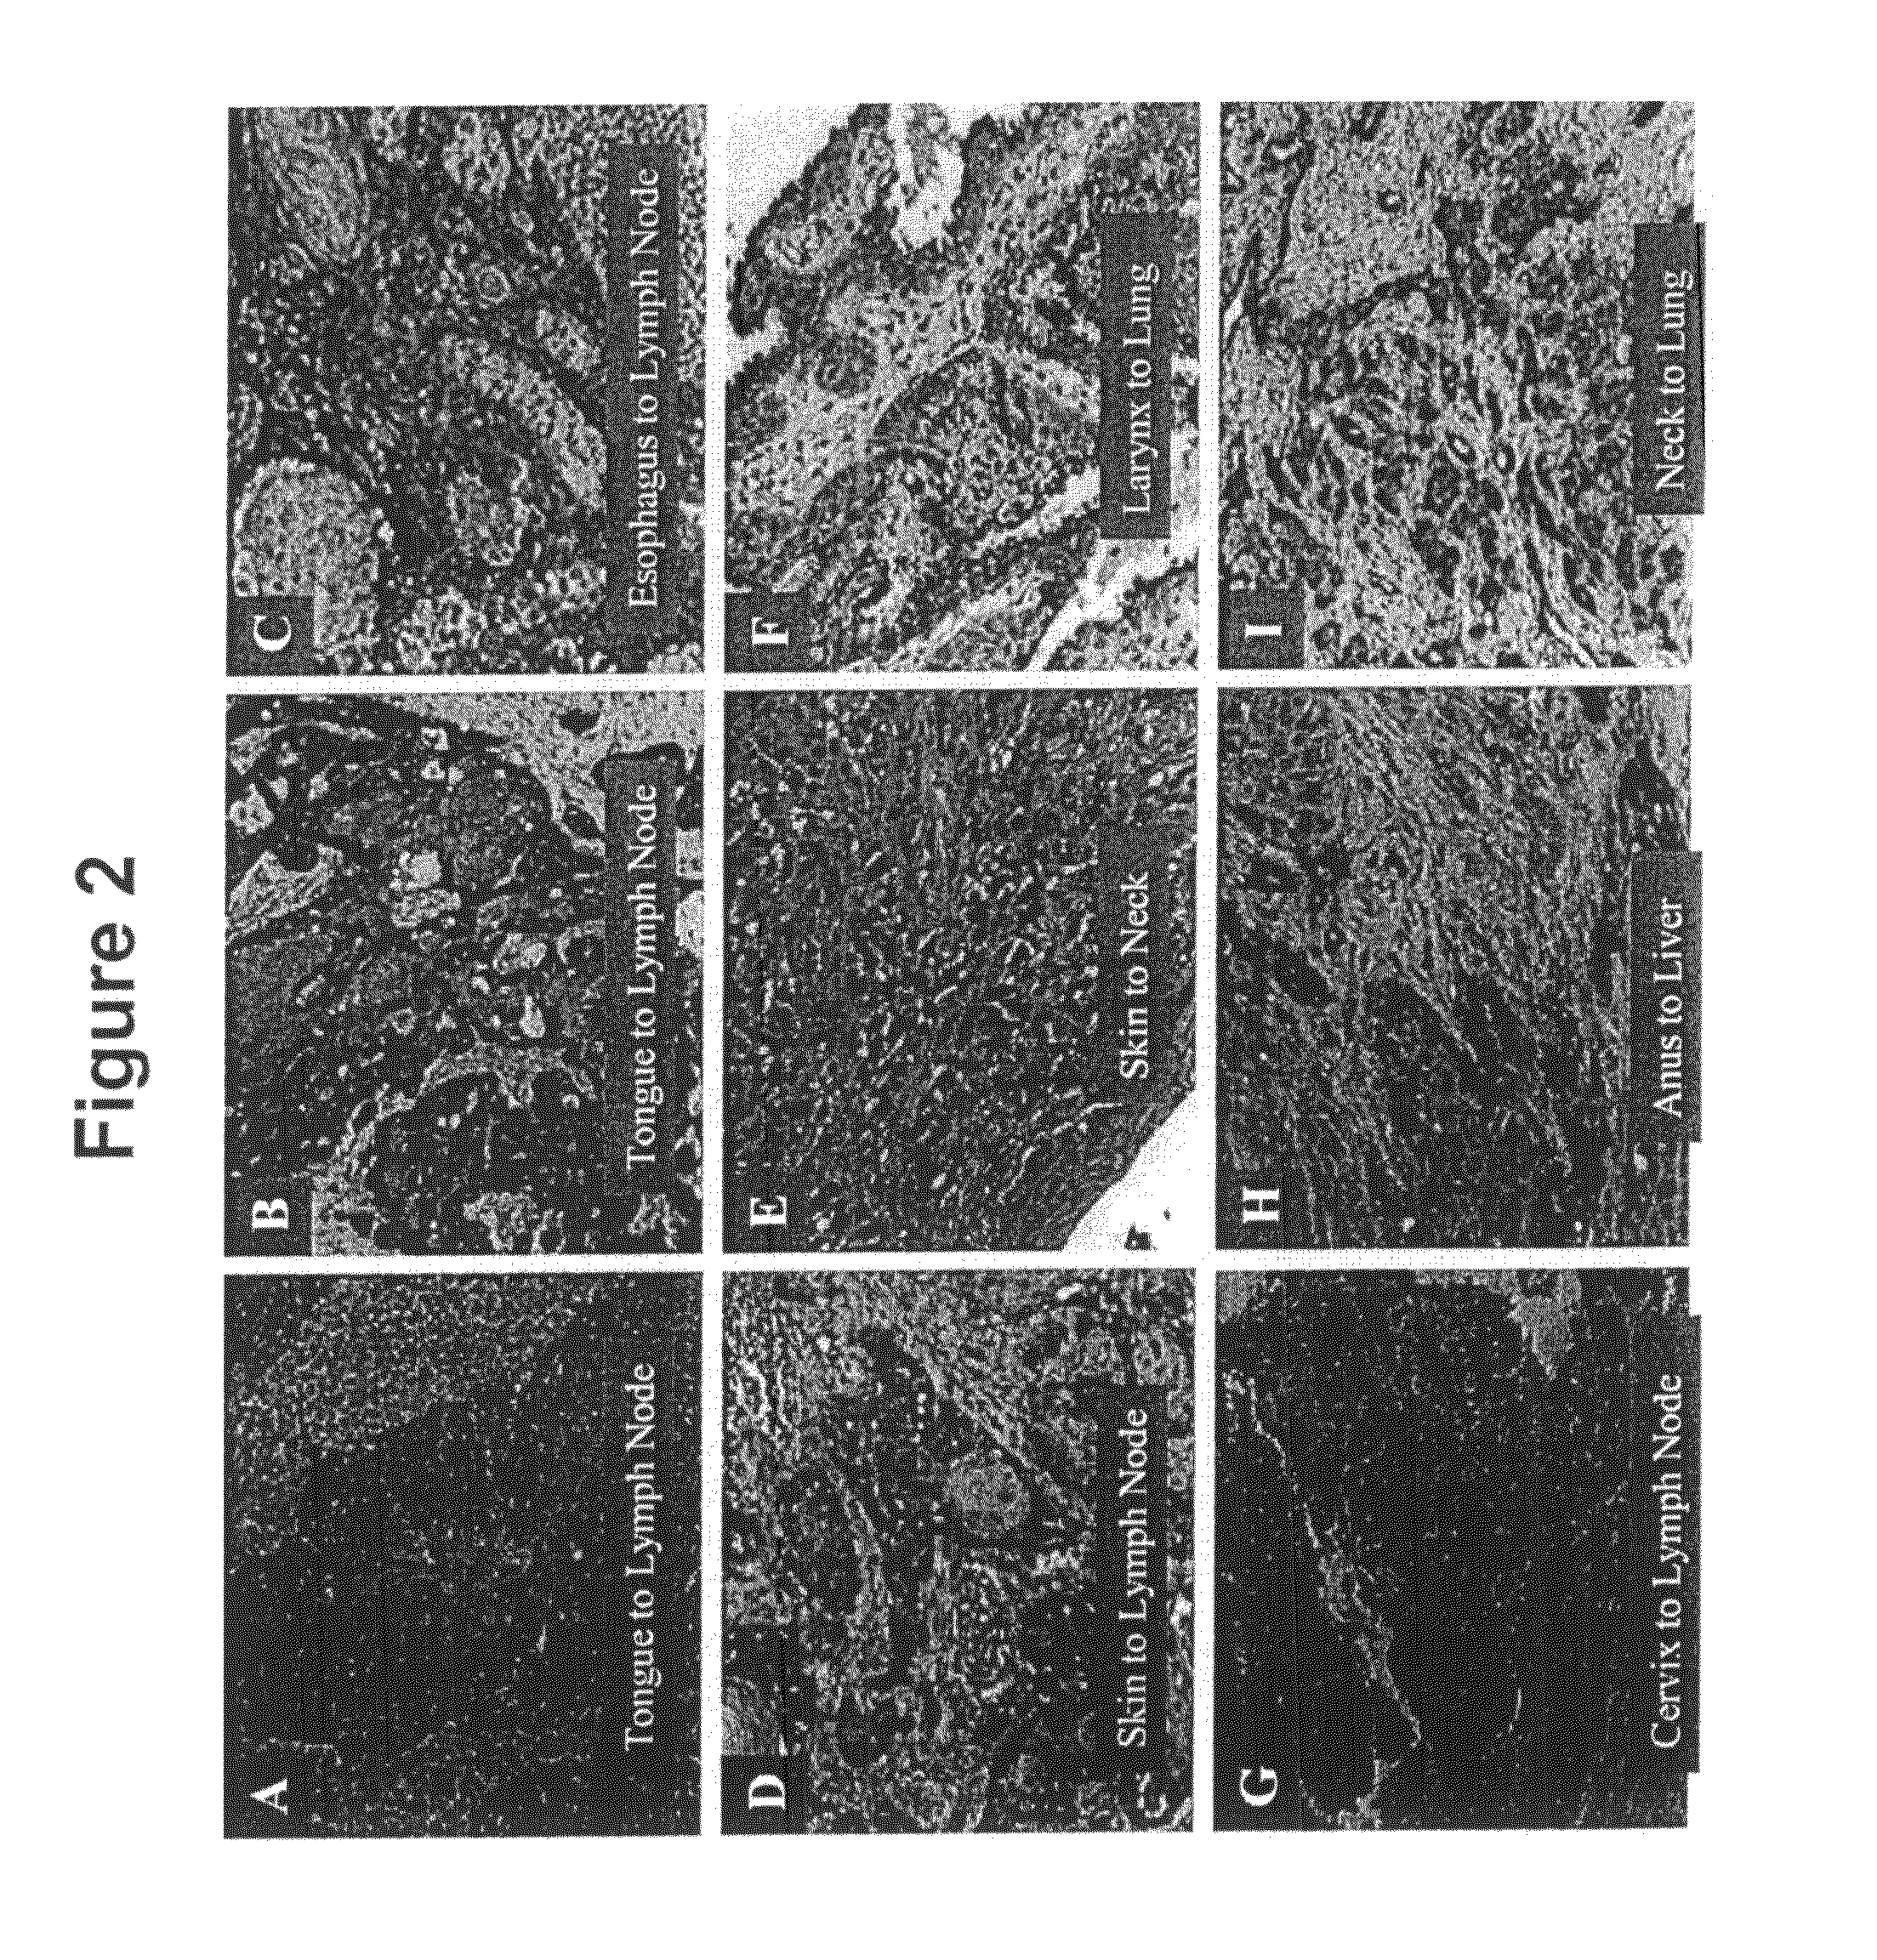 Compositions and methods for inhibiting growth of smad4-deficient cancers